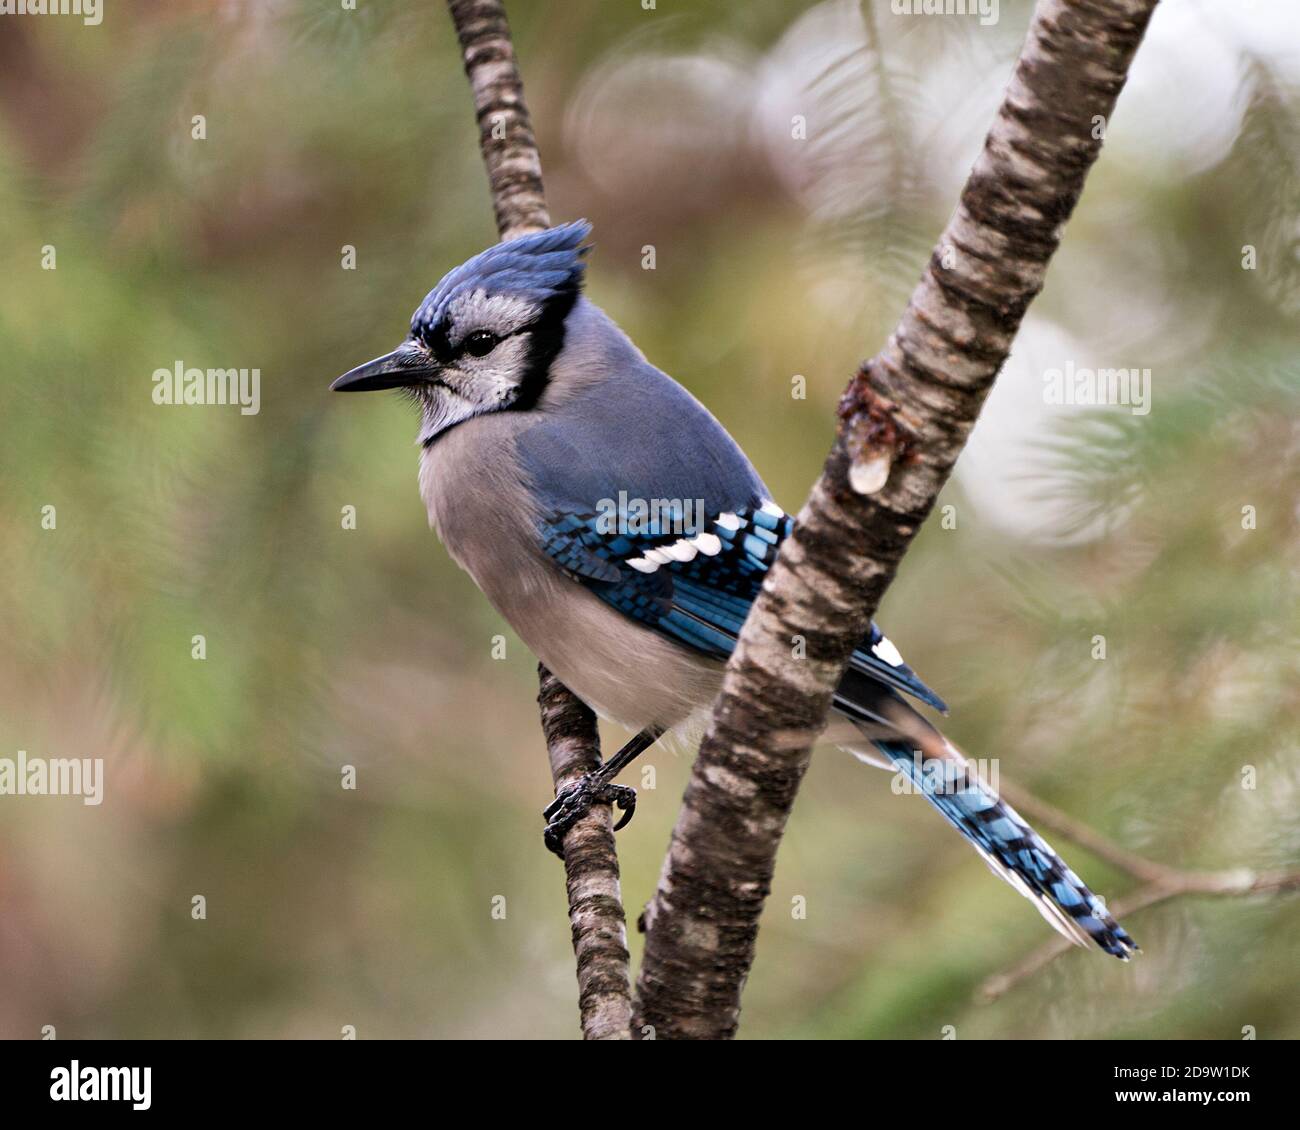 Blue Jay perched on a branch with a blur background in the forest environment and habitat displaying blue feather plumage wings. Stock Photo